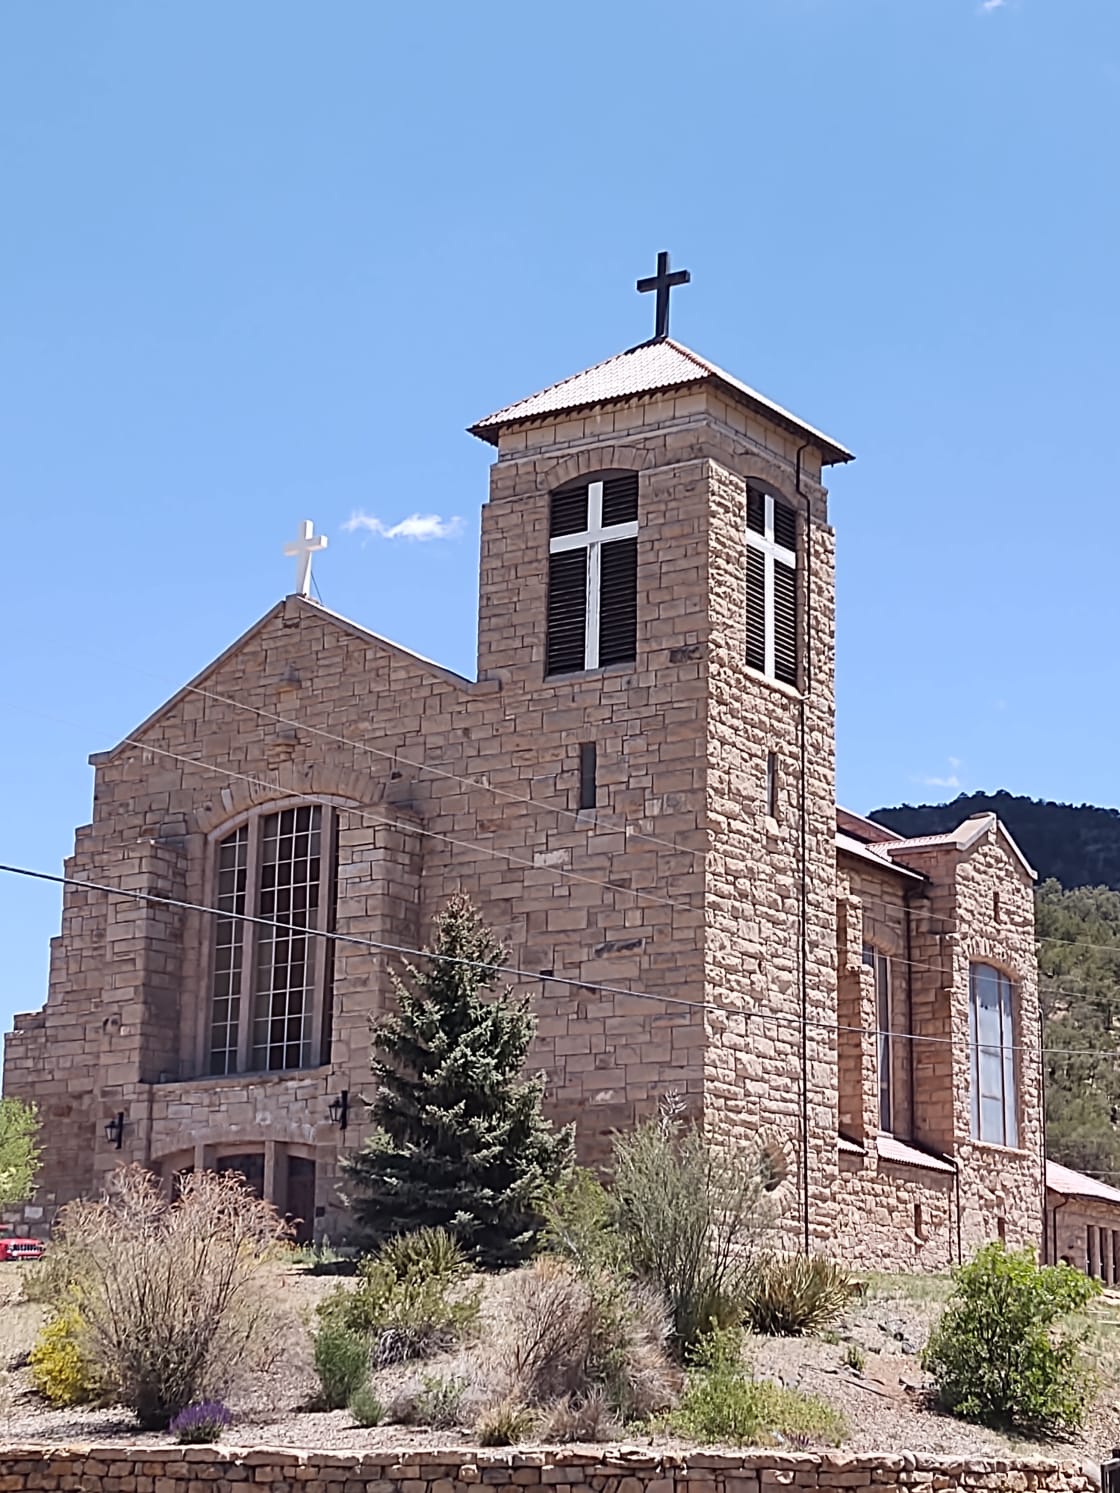 Kevin's property overlooks this beautiful 100 year old Catholic Church, St Josephs Apache Mission just down the hill.  